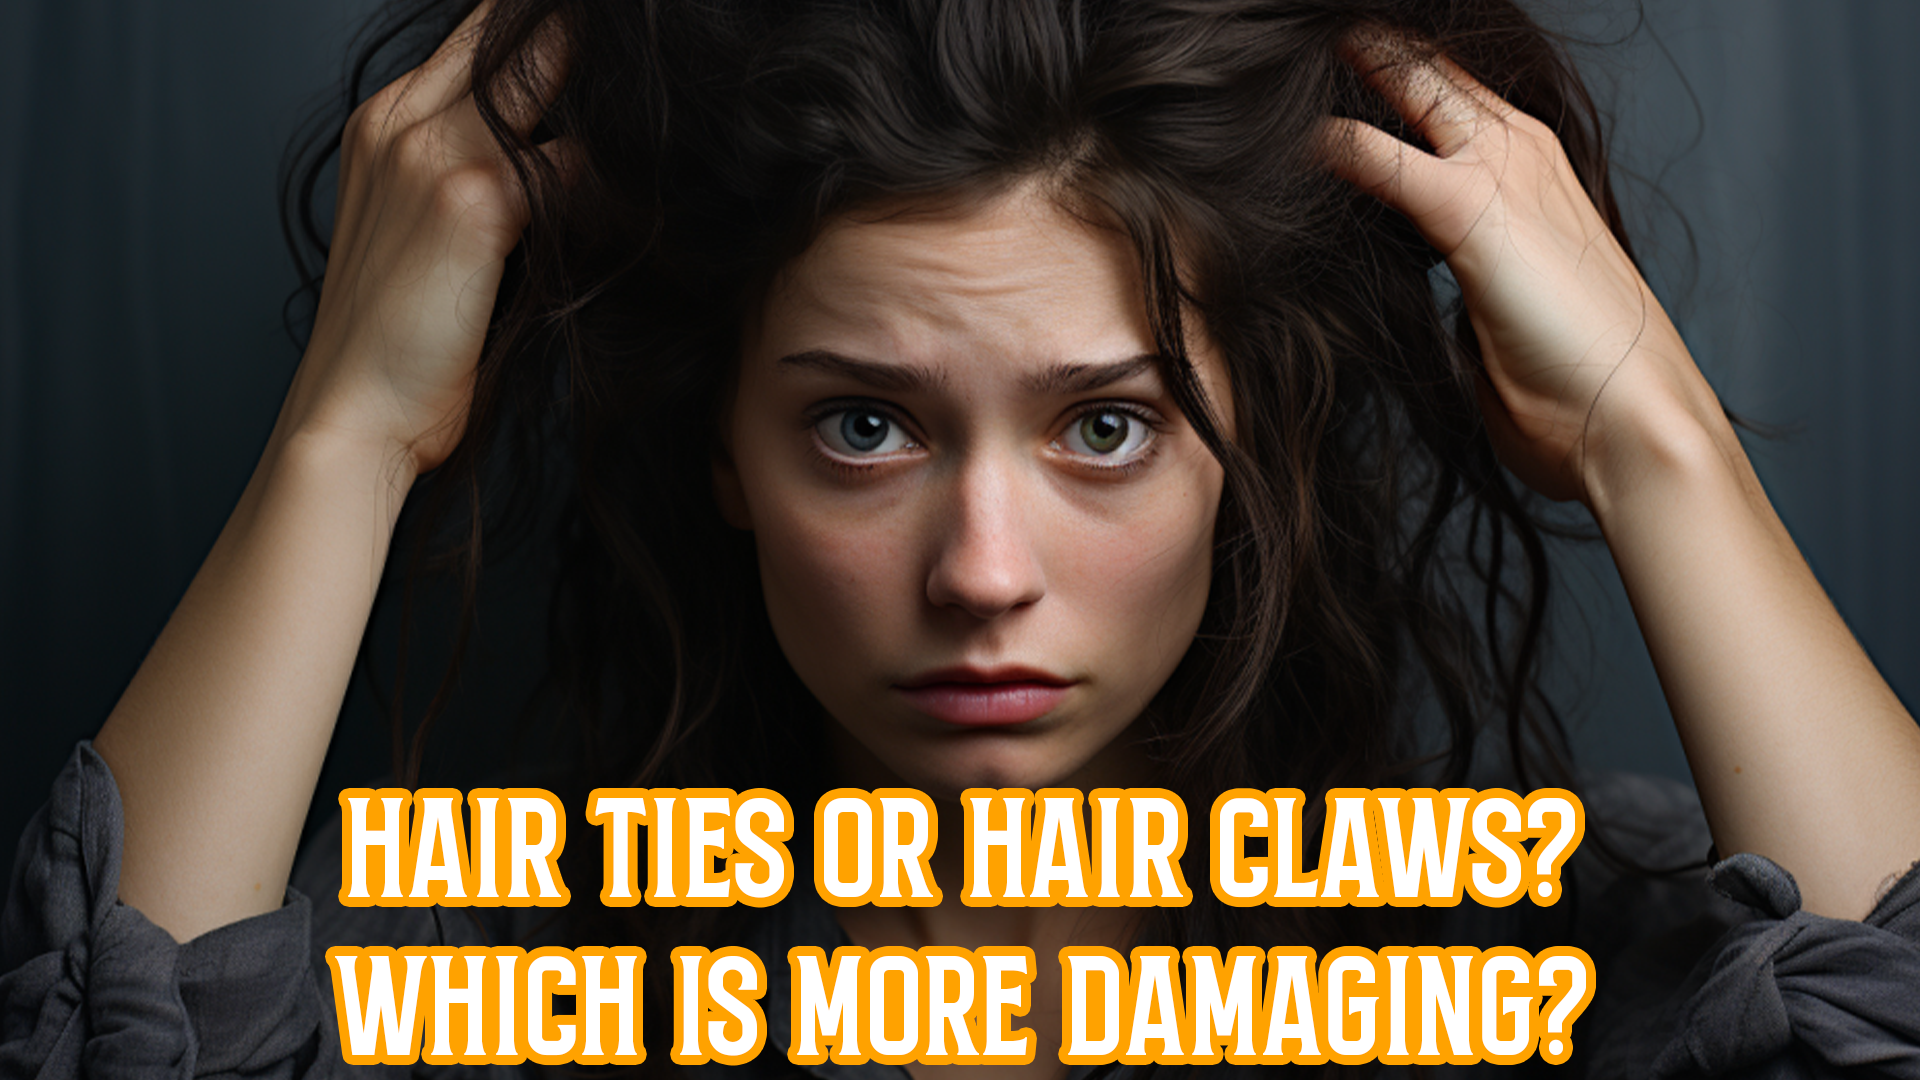 Are Claw Clips Less Damaging Than Hair Ties? Find Out Now!